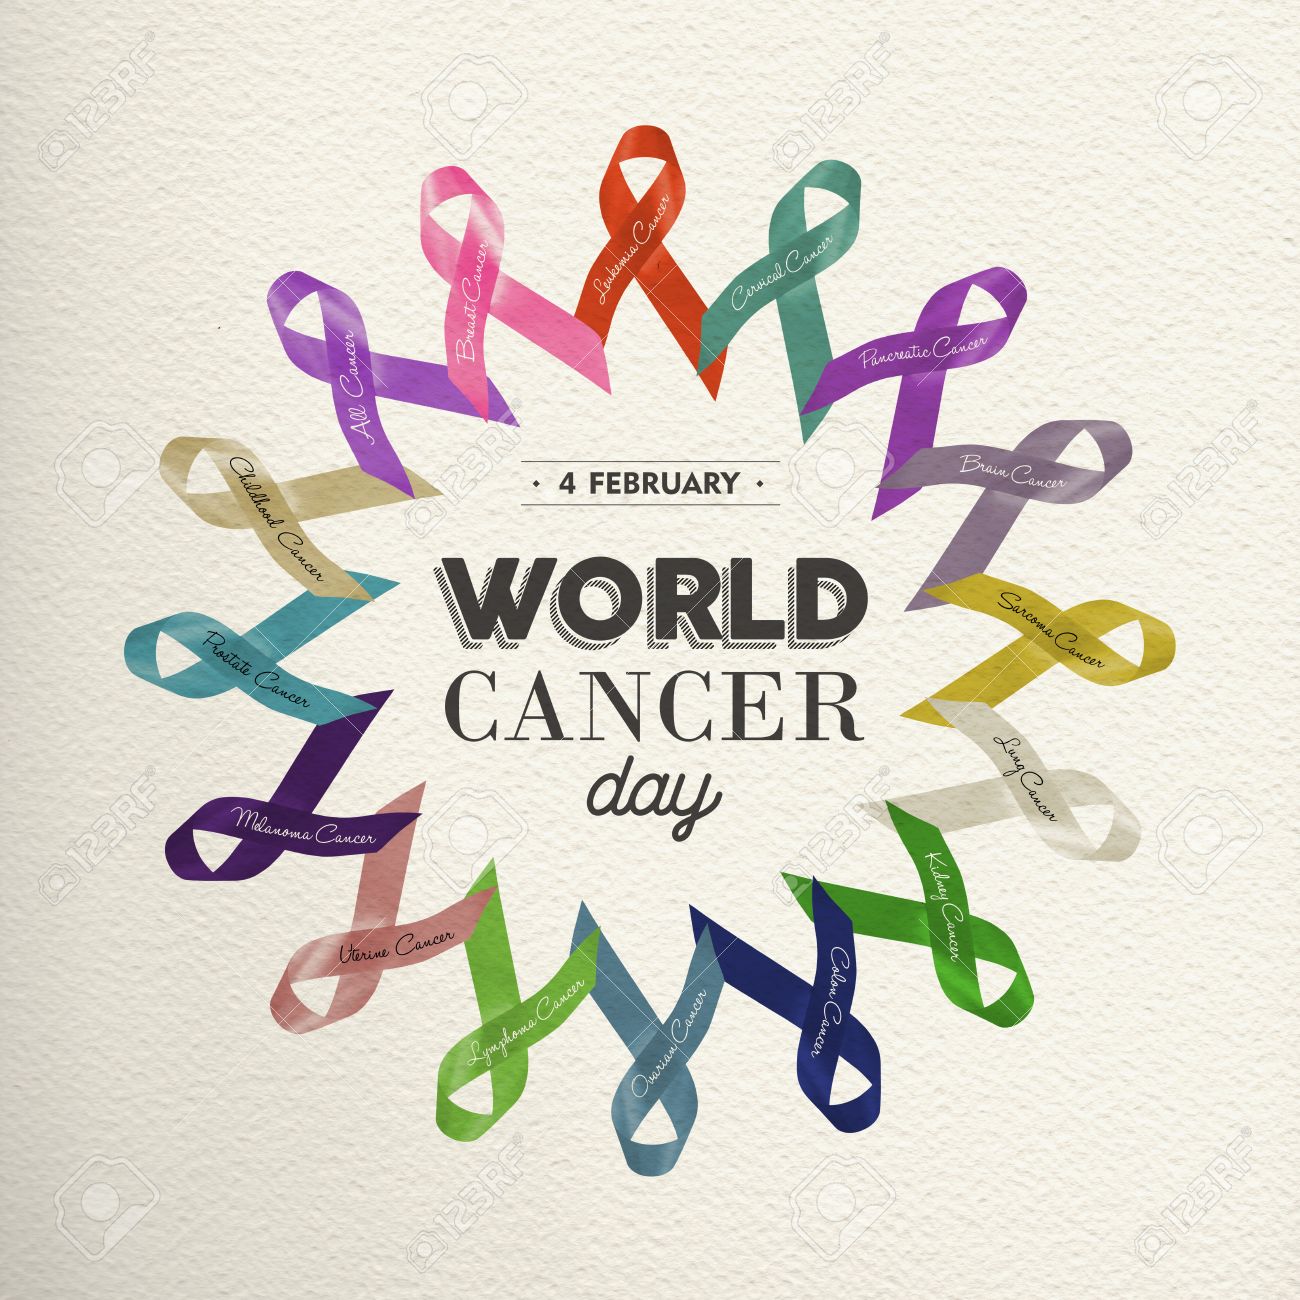 World cancer day design with awareness ribbons